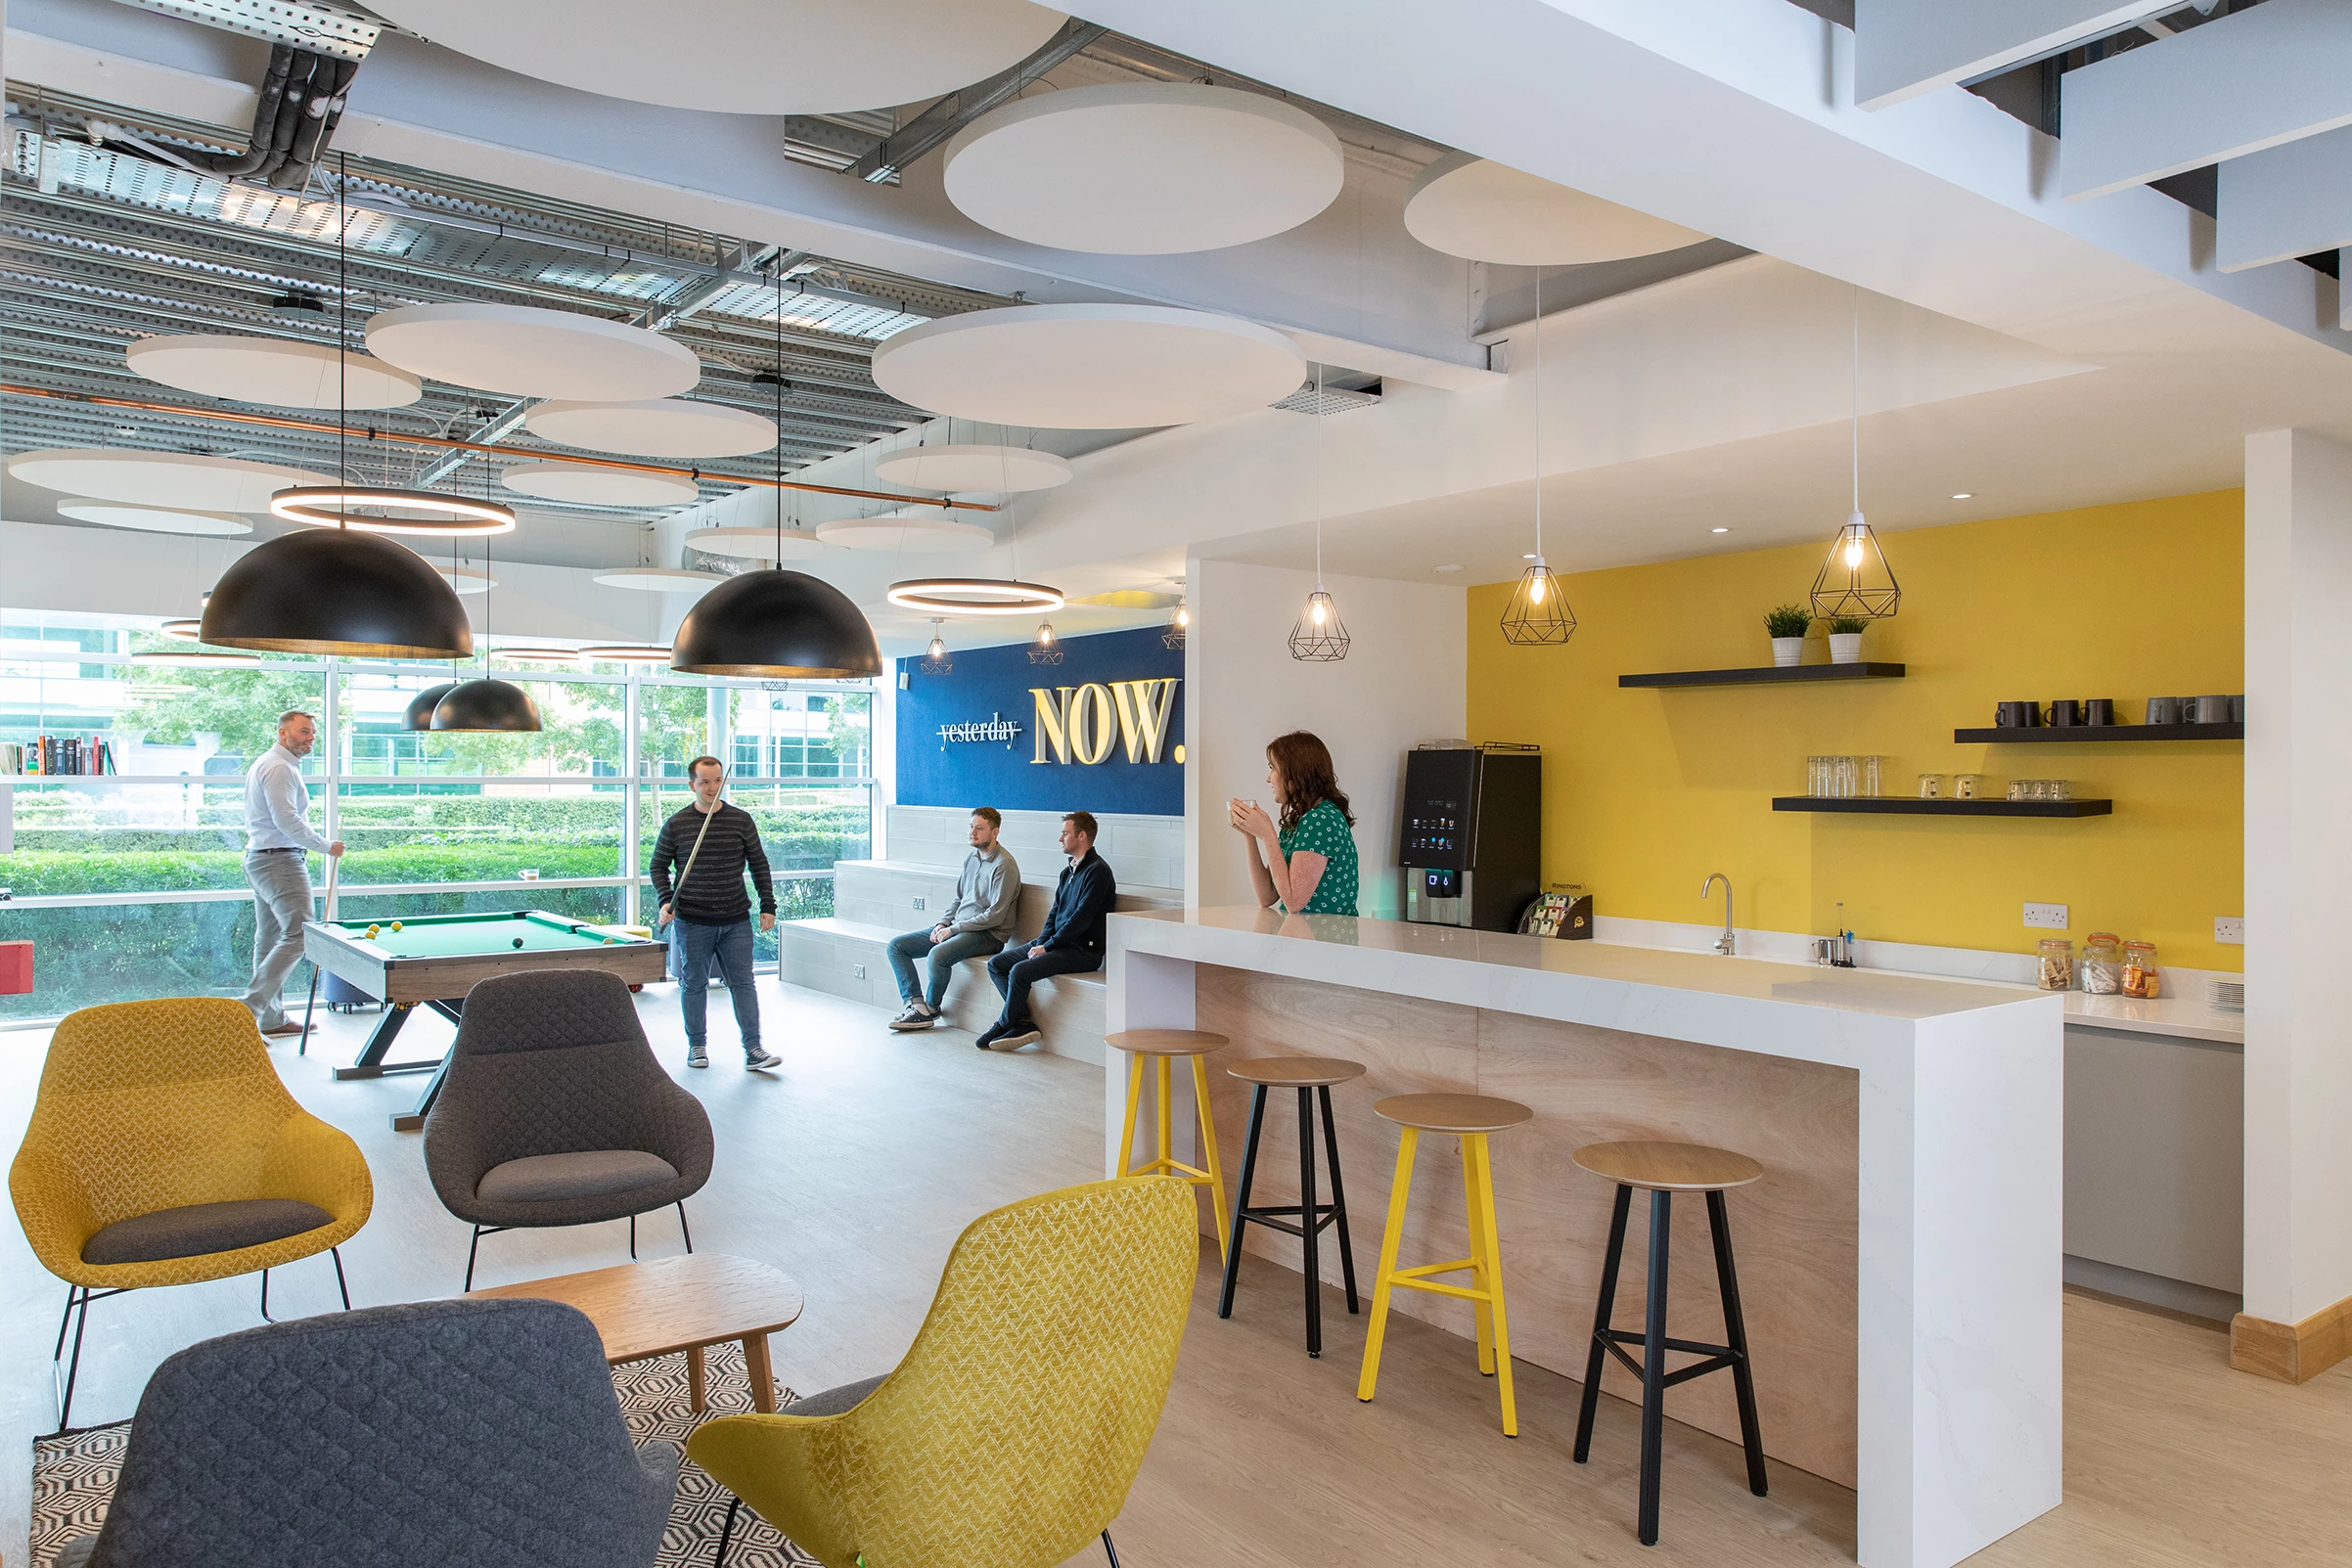 The Q11 collaborative workspace, launched in 2021 by Shelborn Asset Management 